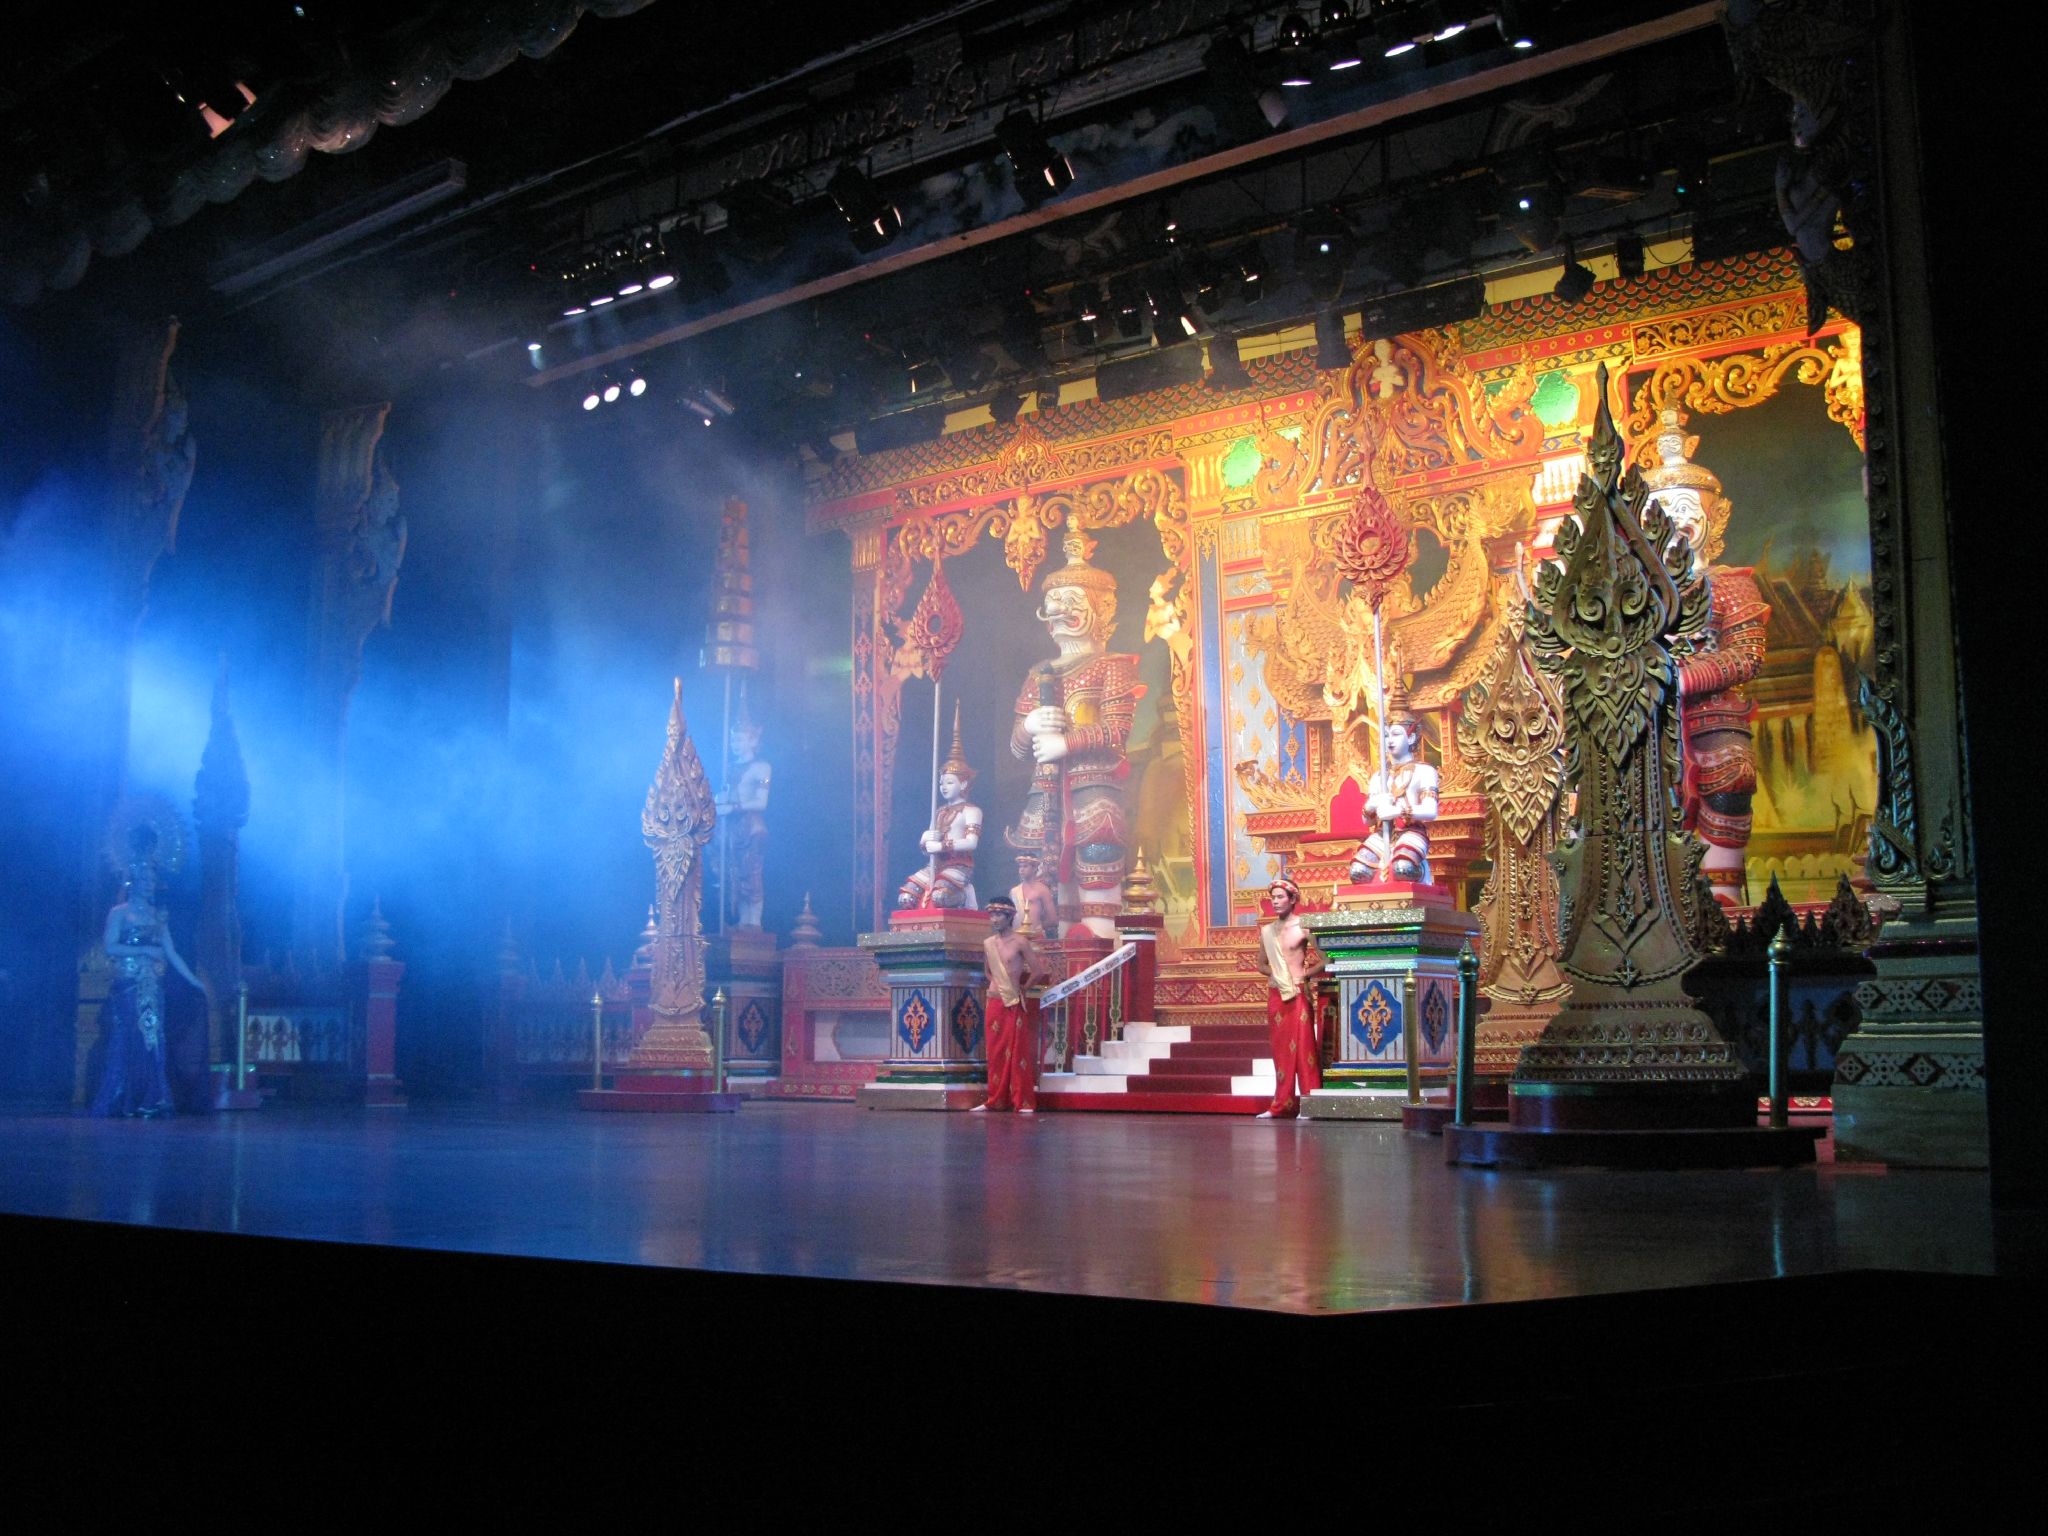 stage with light and decorations of elaborate architecture